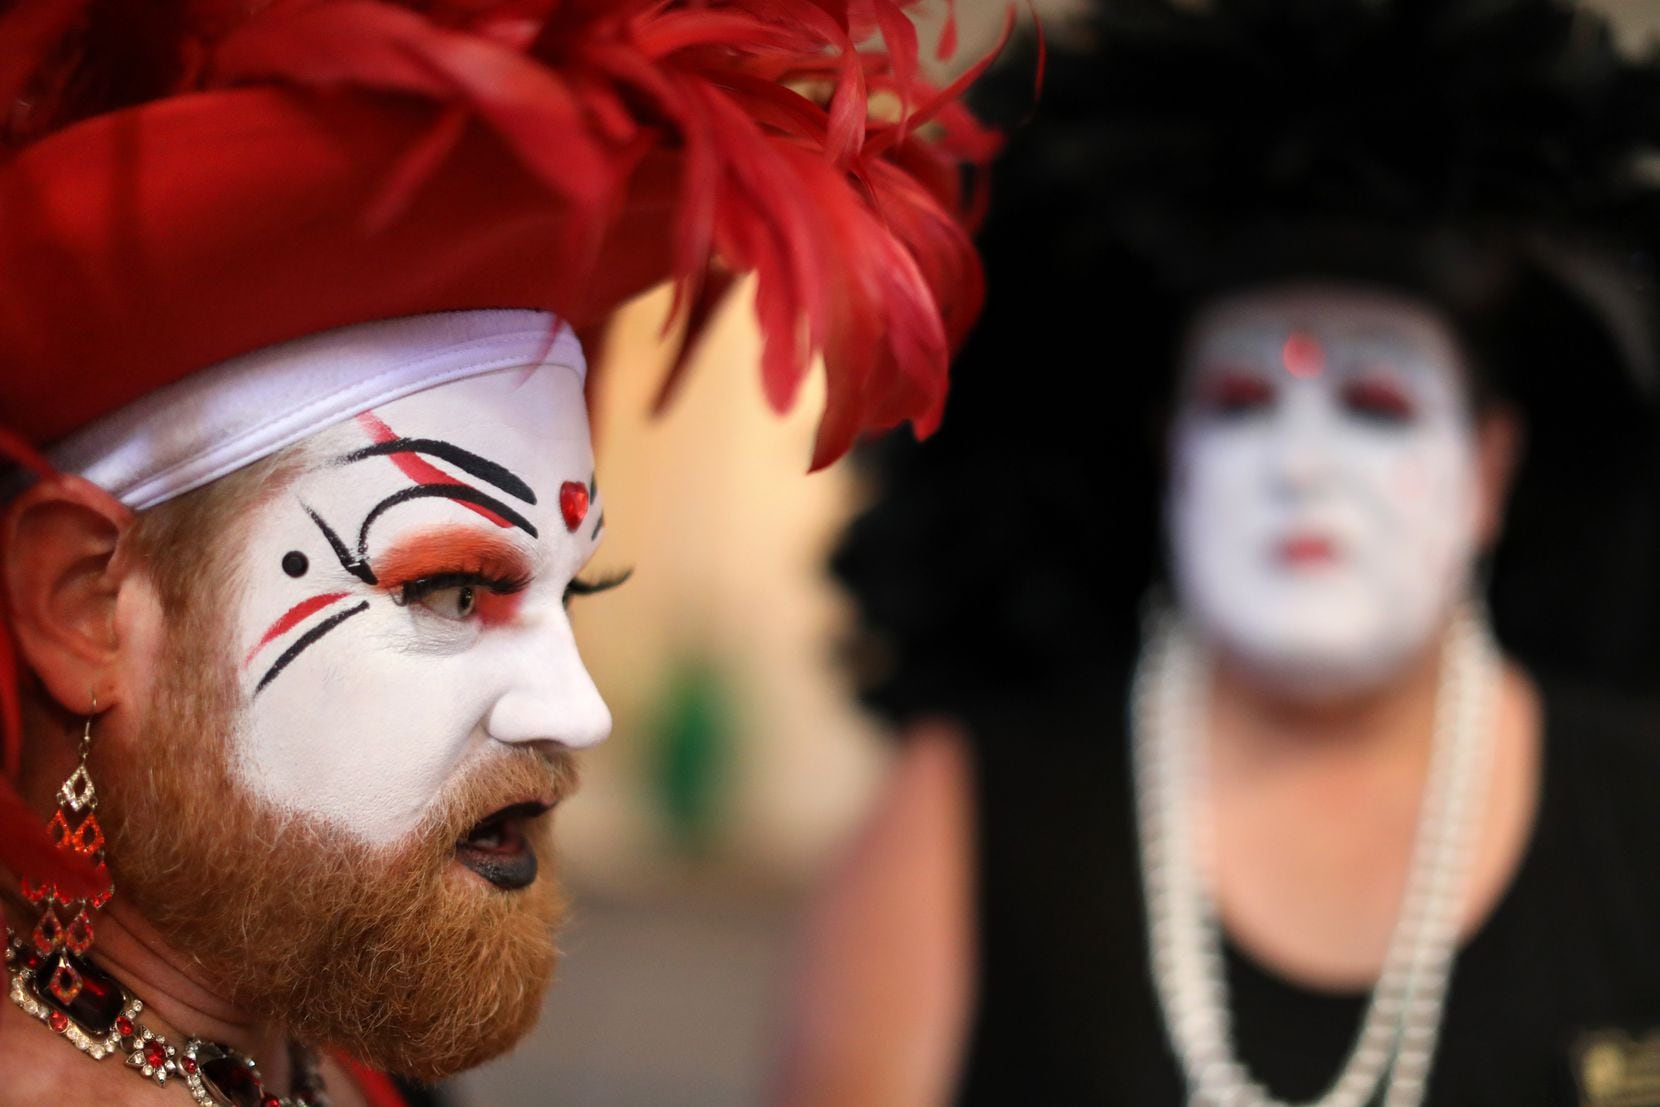 Religious groups protest Sisters of Perpetual Indulgence before